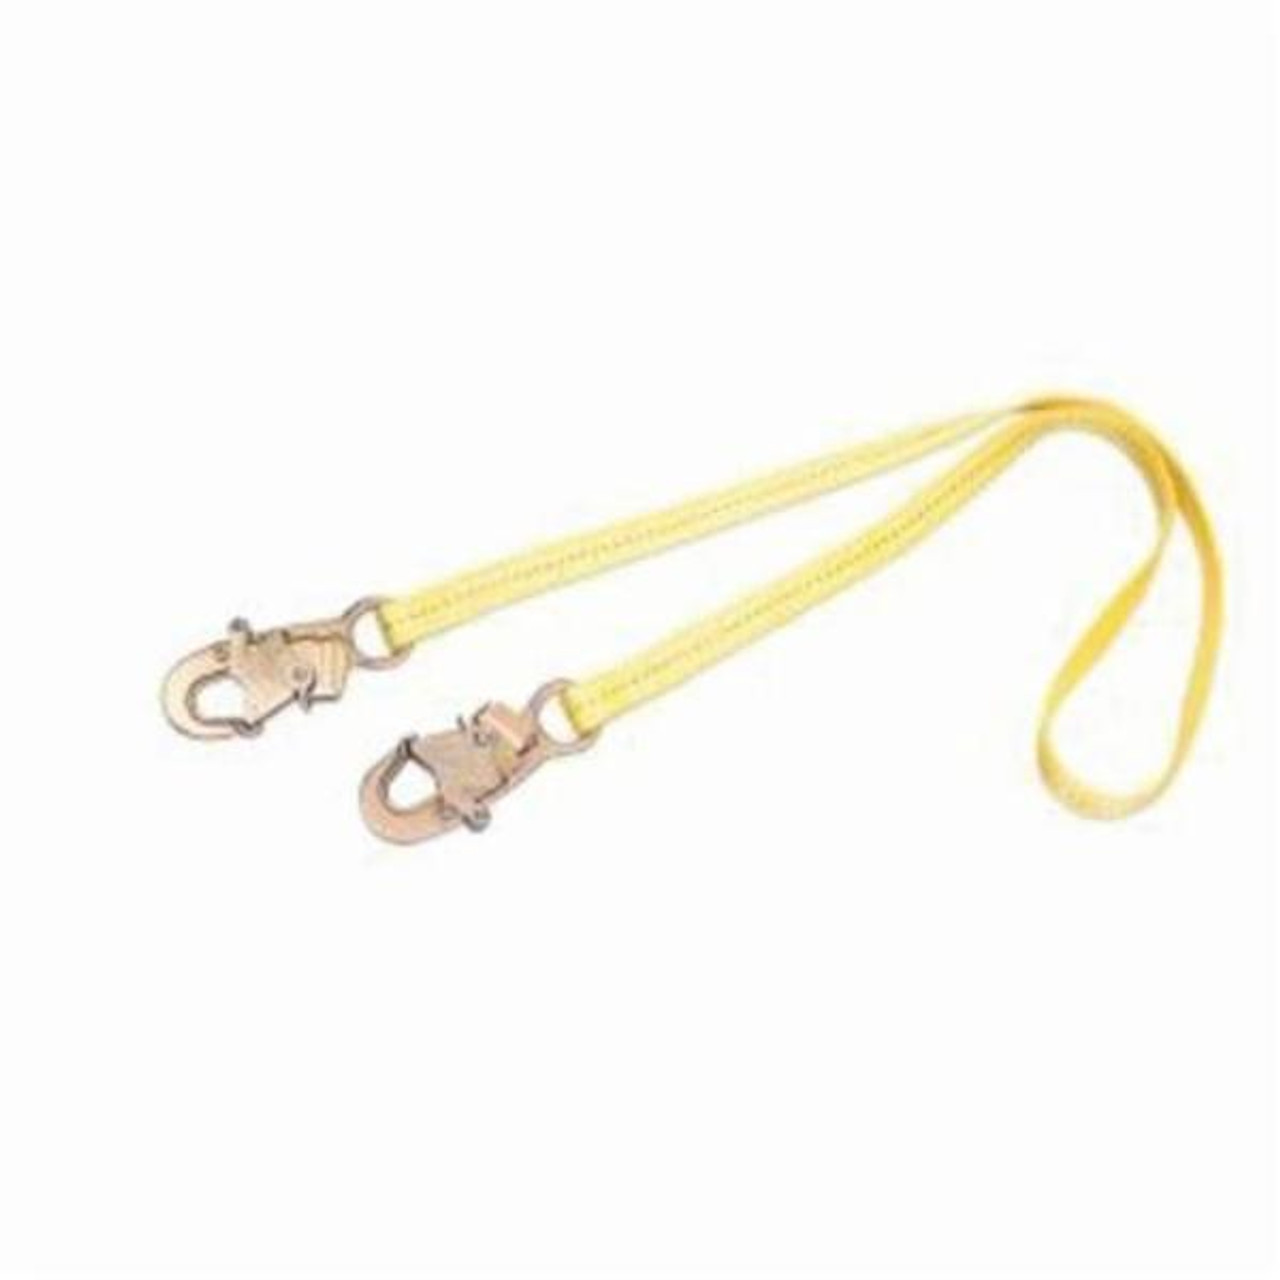 Safety Single Leg Tie-Back Lanyard with Snap hooks both ends